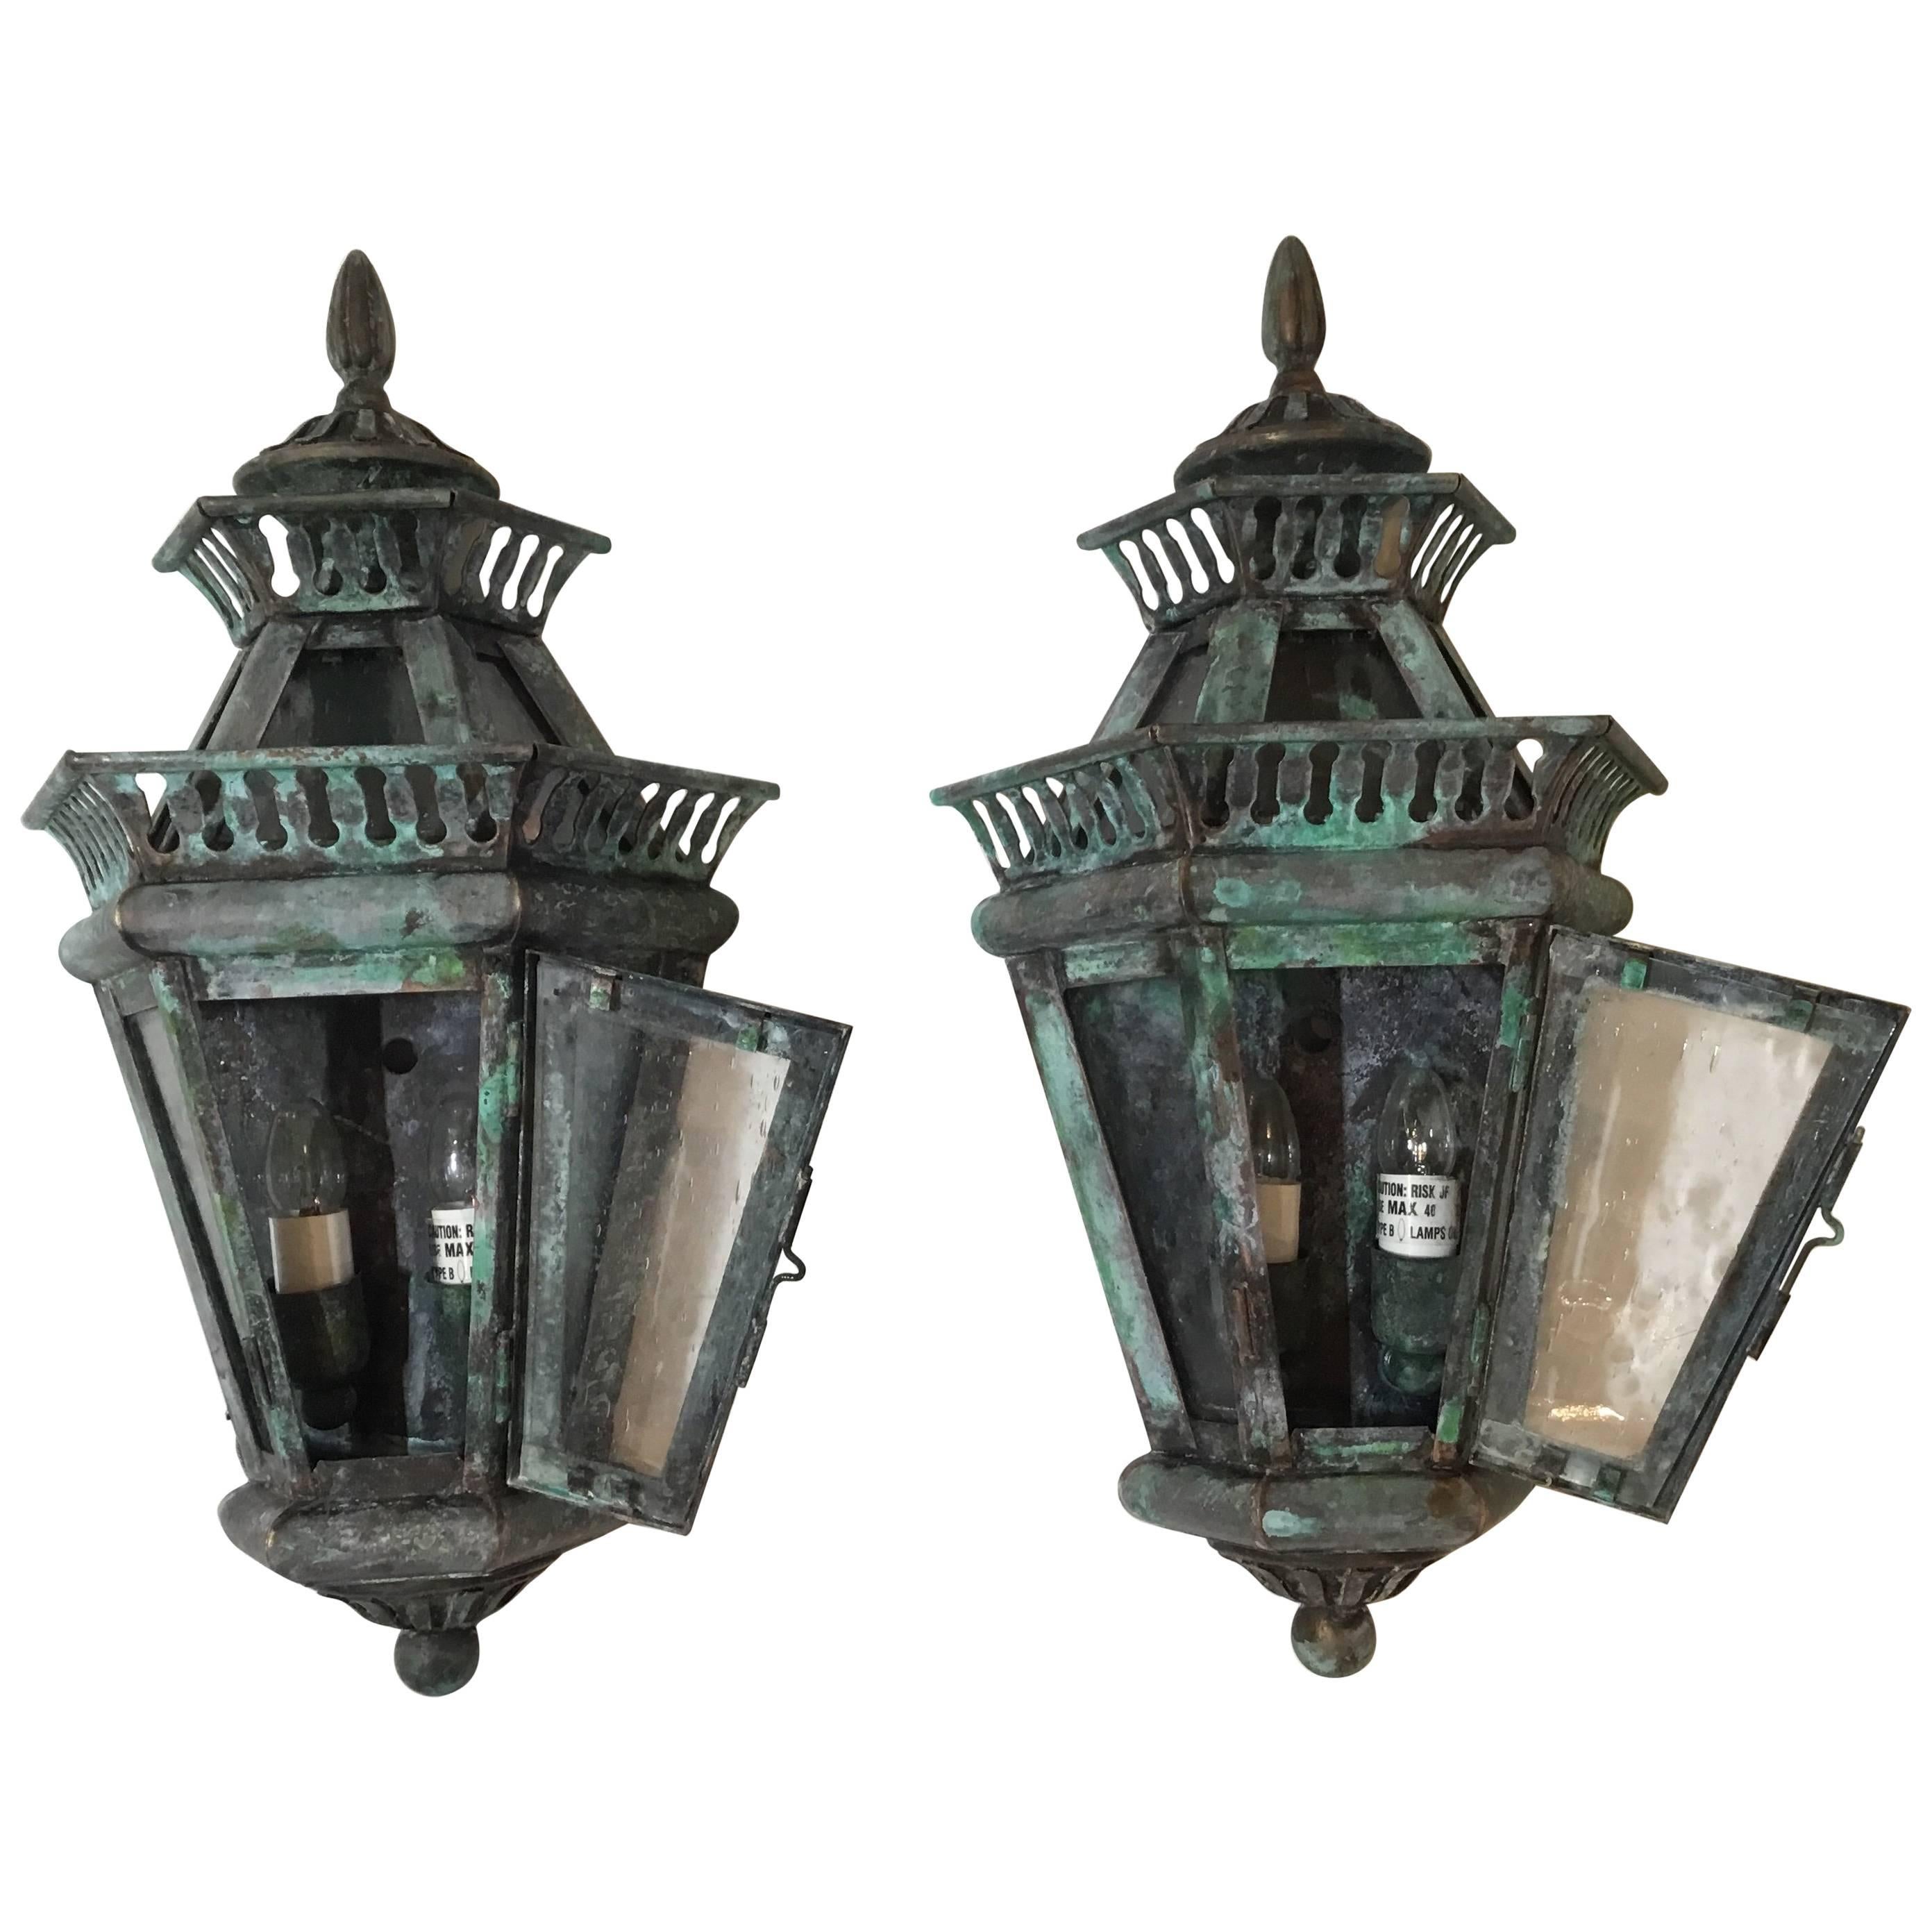 Pair of Solid Brass Wall Lanterns